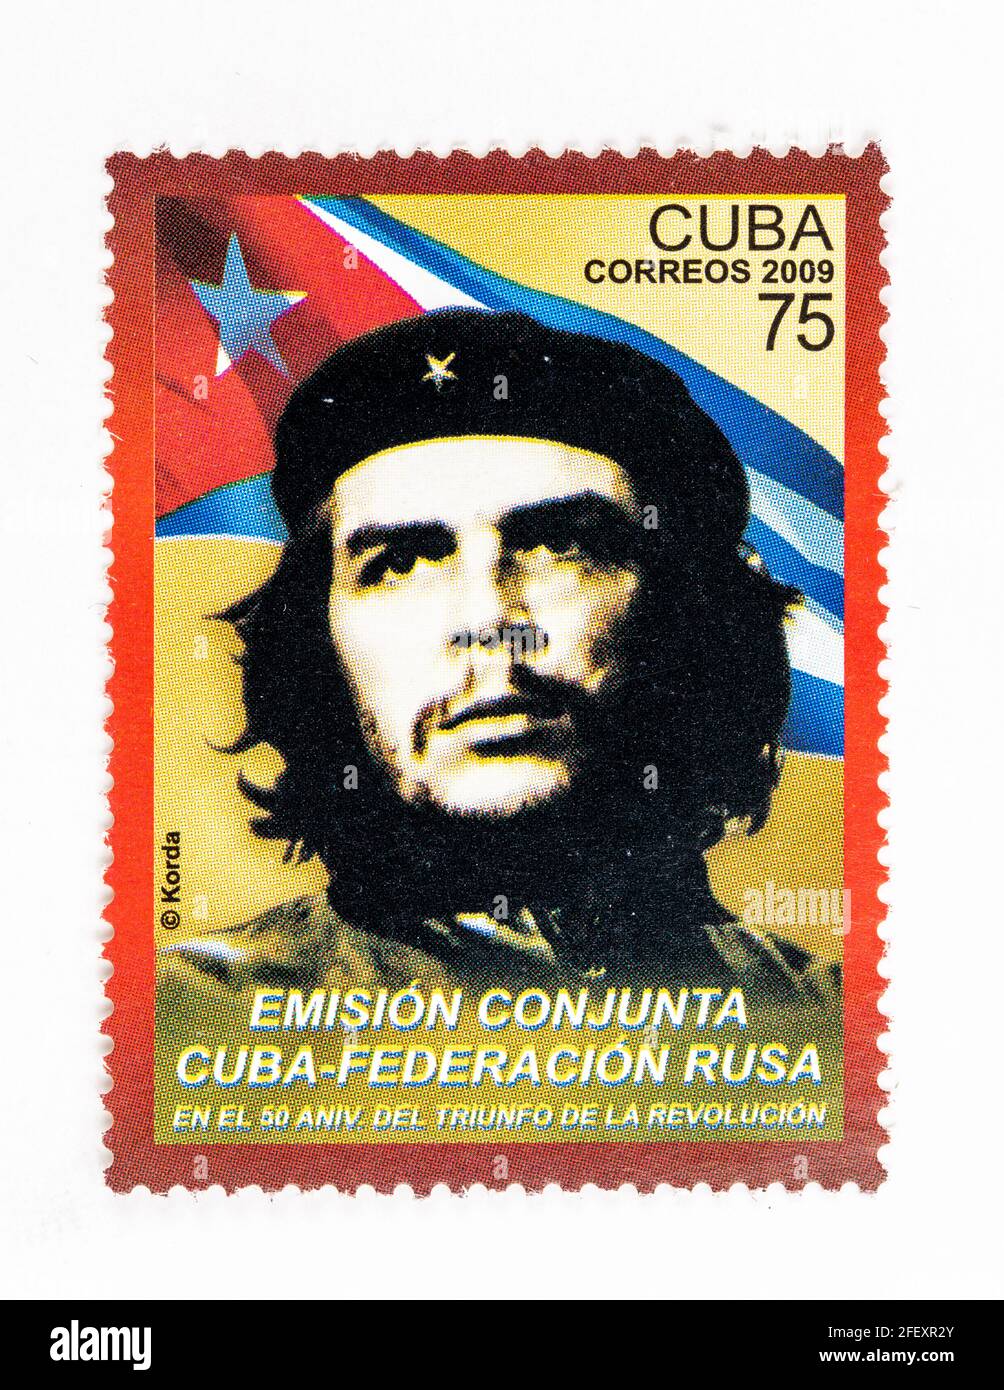 Vintage 'Cuba Correos' stamp with the Che Guevara image. Year 2009. Special emission by the Russian Federation and Cuba for the 50th Anniversary of th Stock Photo